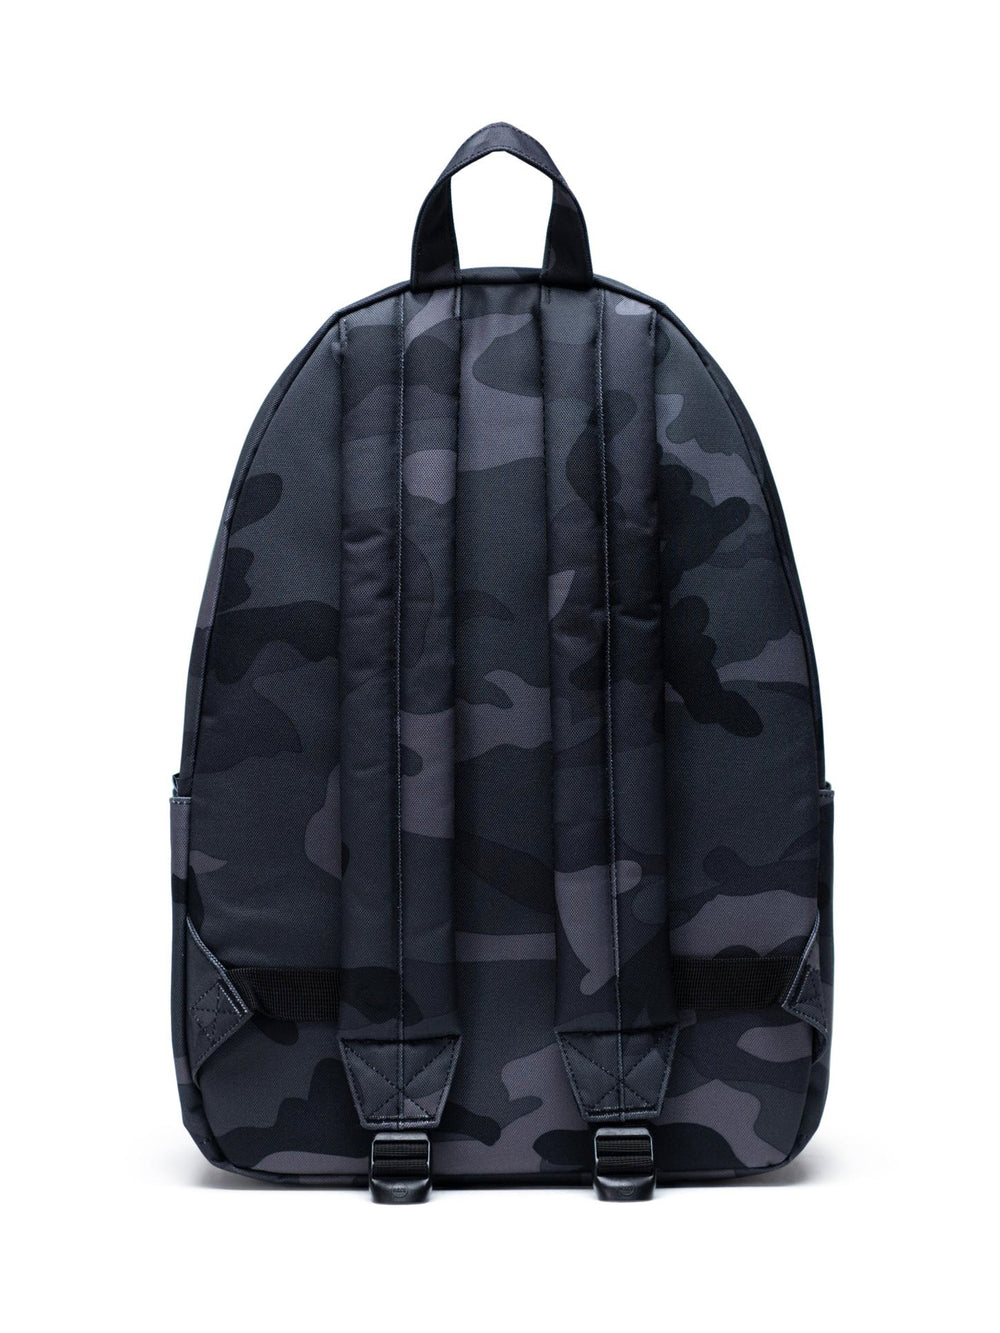 HERSCHEL SUPPLY CO. CLASSIC XL 30L BACKPACK - NIGHT CAMO - DÉSTOCKAGE